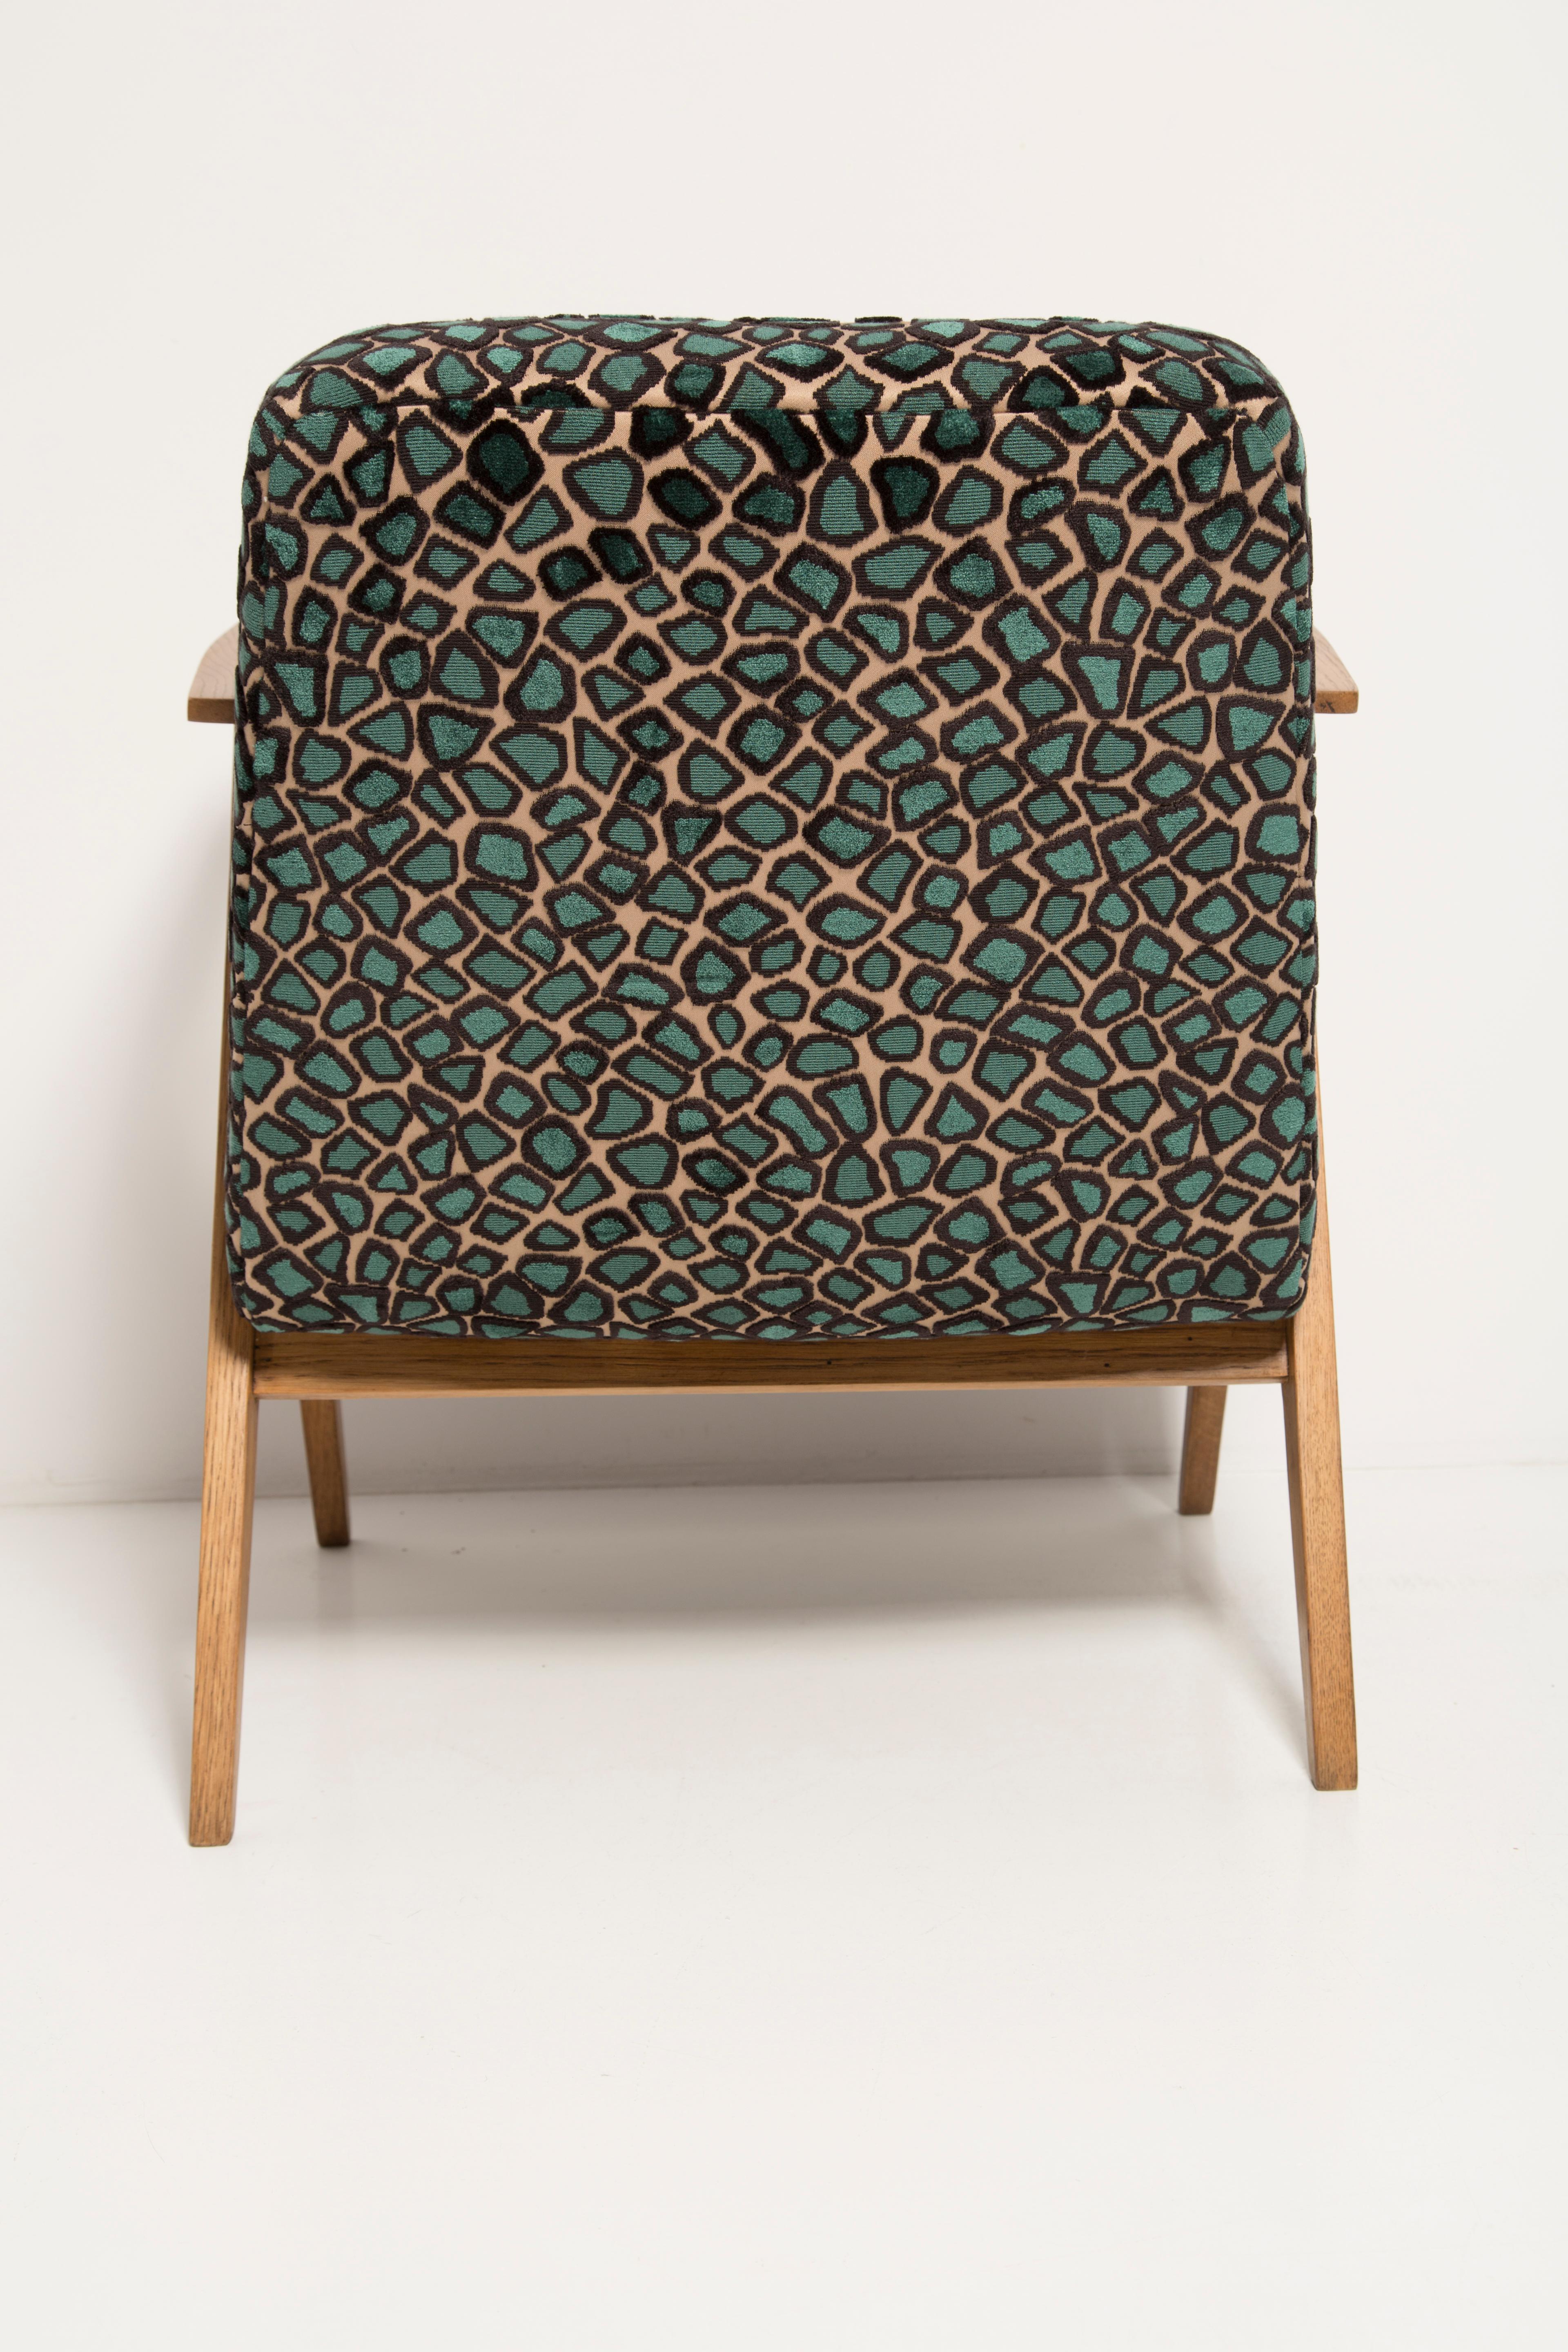 Two Mid Century 366 Armchairs in Leopard Velvet, by Chierowski, Europe, 1960s For Sale 6